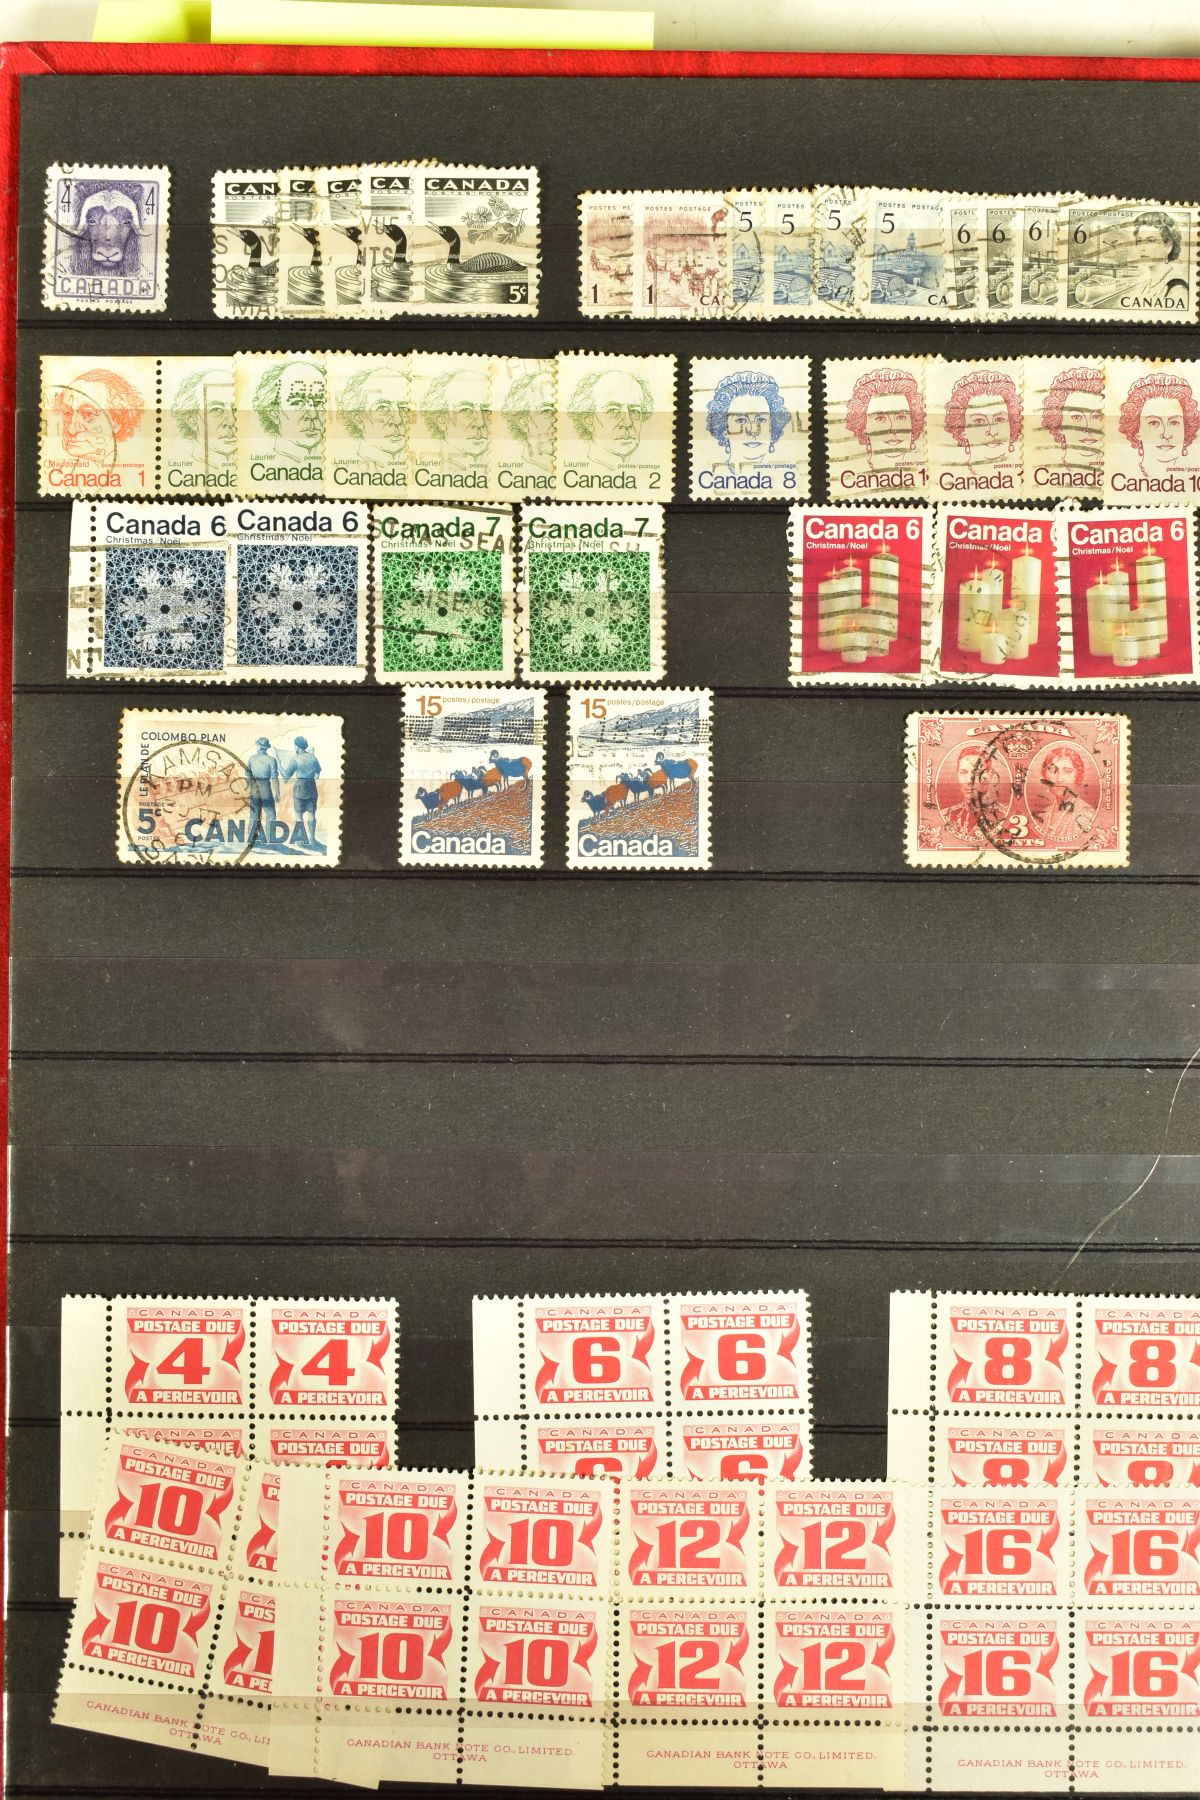 A LARGE BOX OF STAMPS WITH FIRST DAY COVERS, 1977 Commonwealth Silver Jubilee types, useful GB and - Image 6 of 10